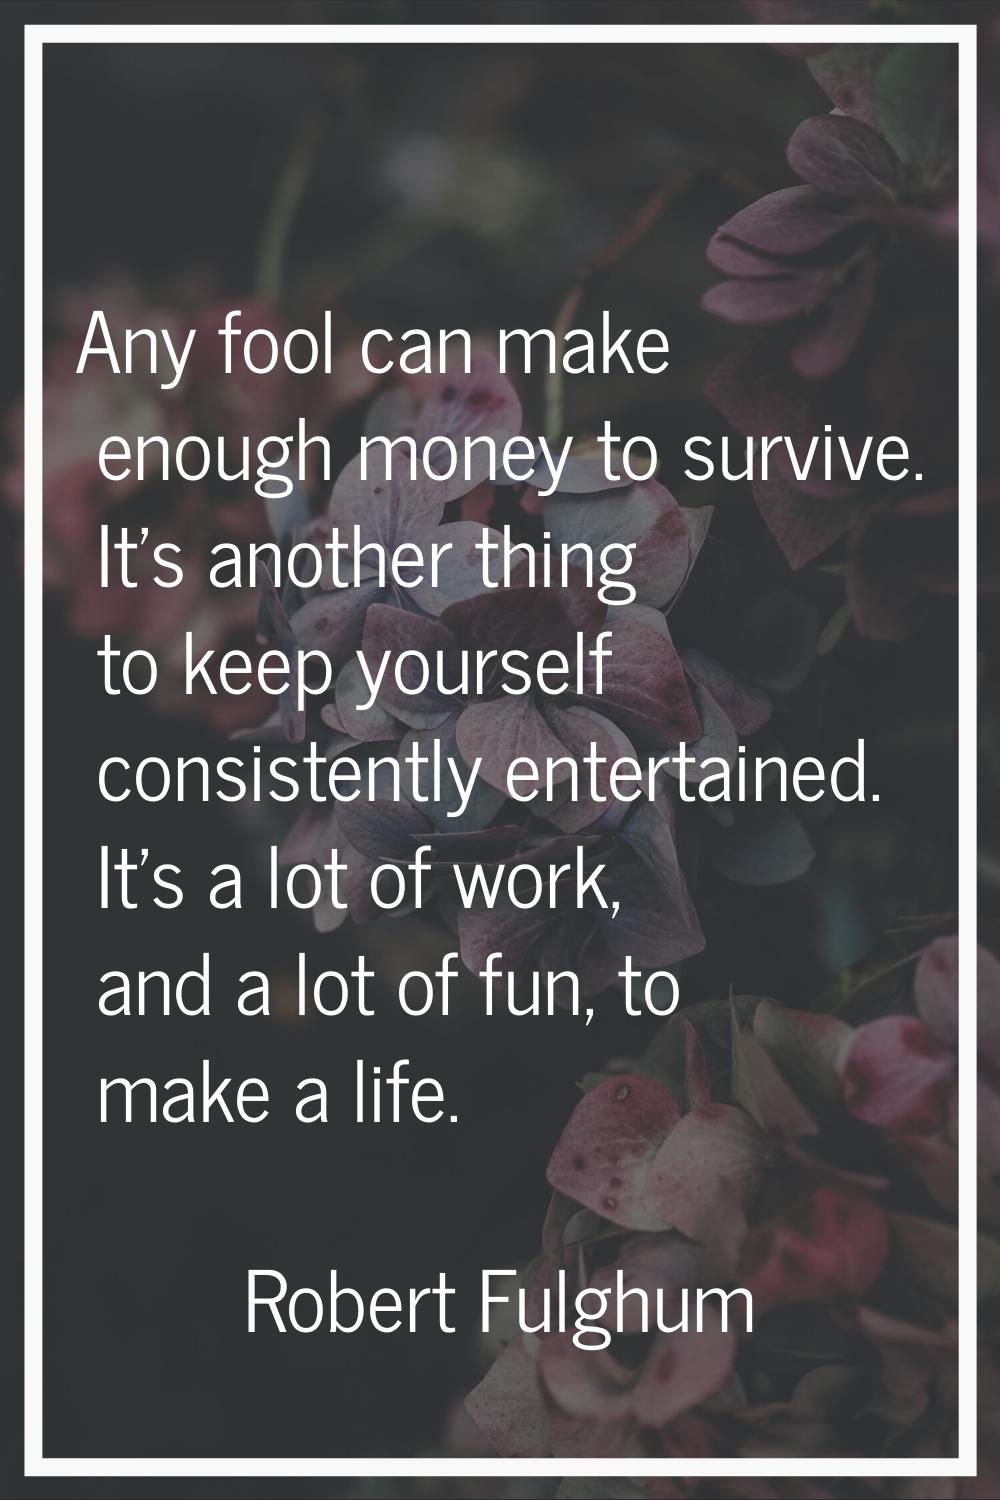 Any fool can make enough money to survive. It's another thing to keep yourself consistently enterta